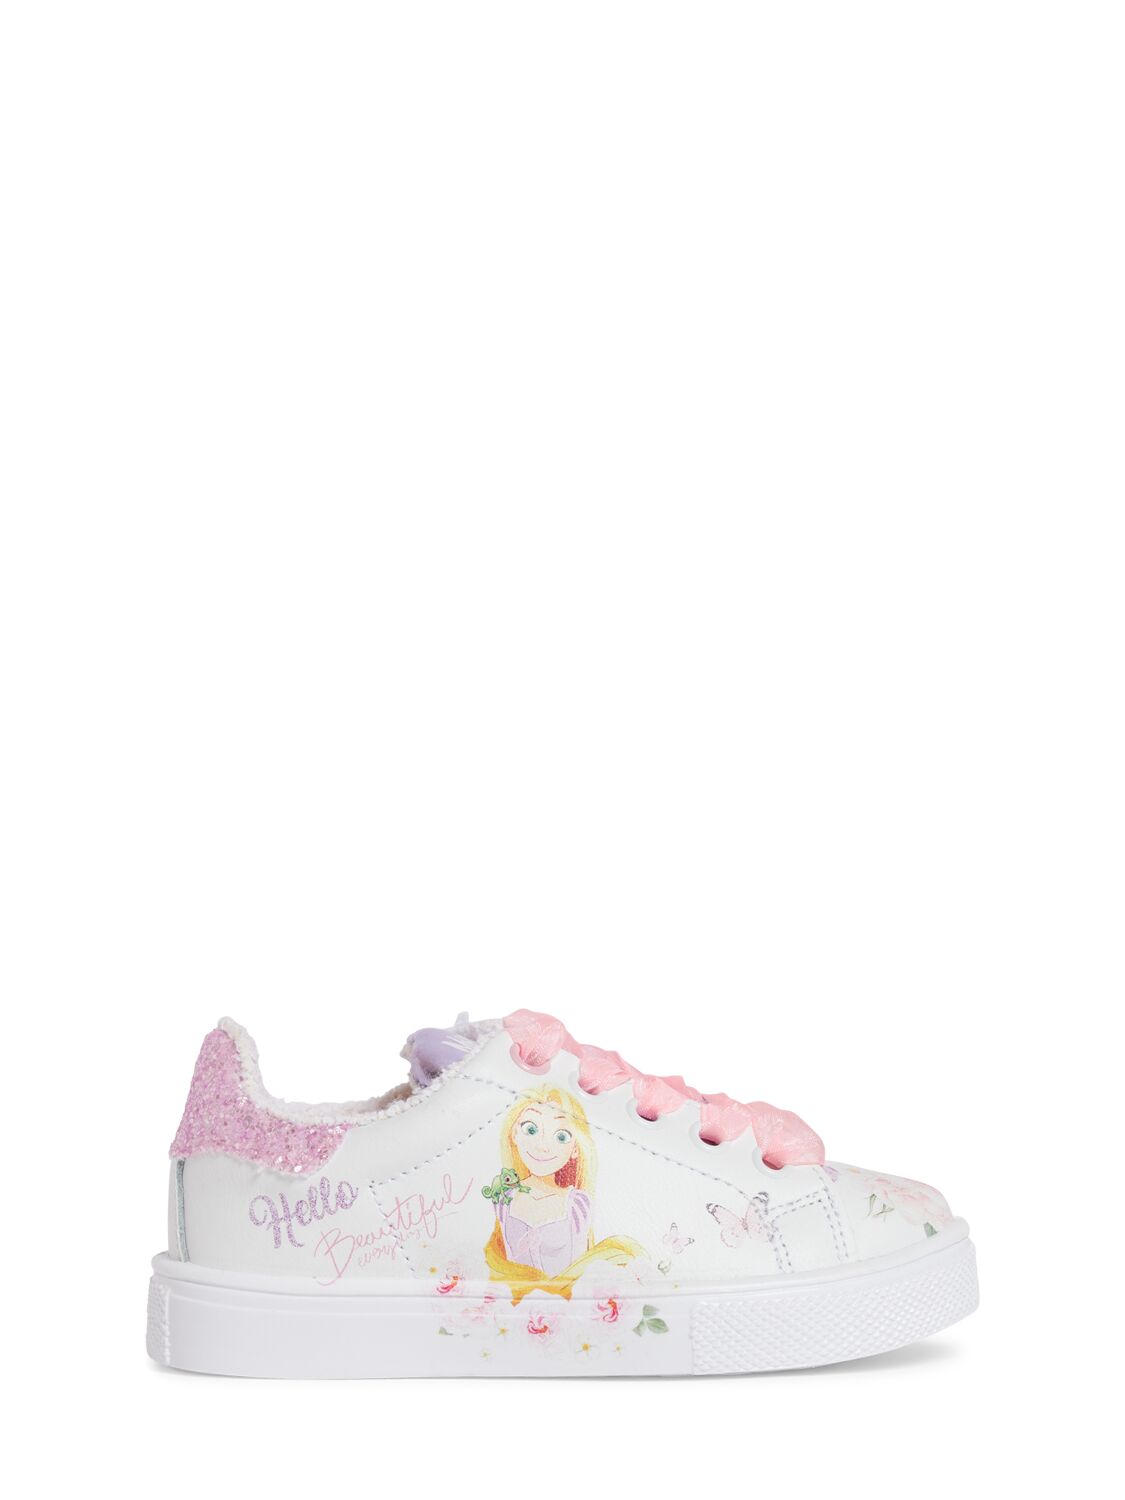 Monnalisa Kids' Frozen Printed Leather Sneakers In White,pink